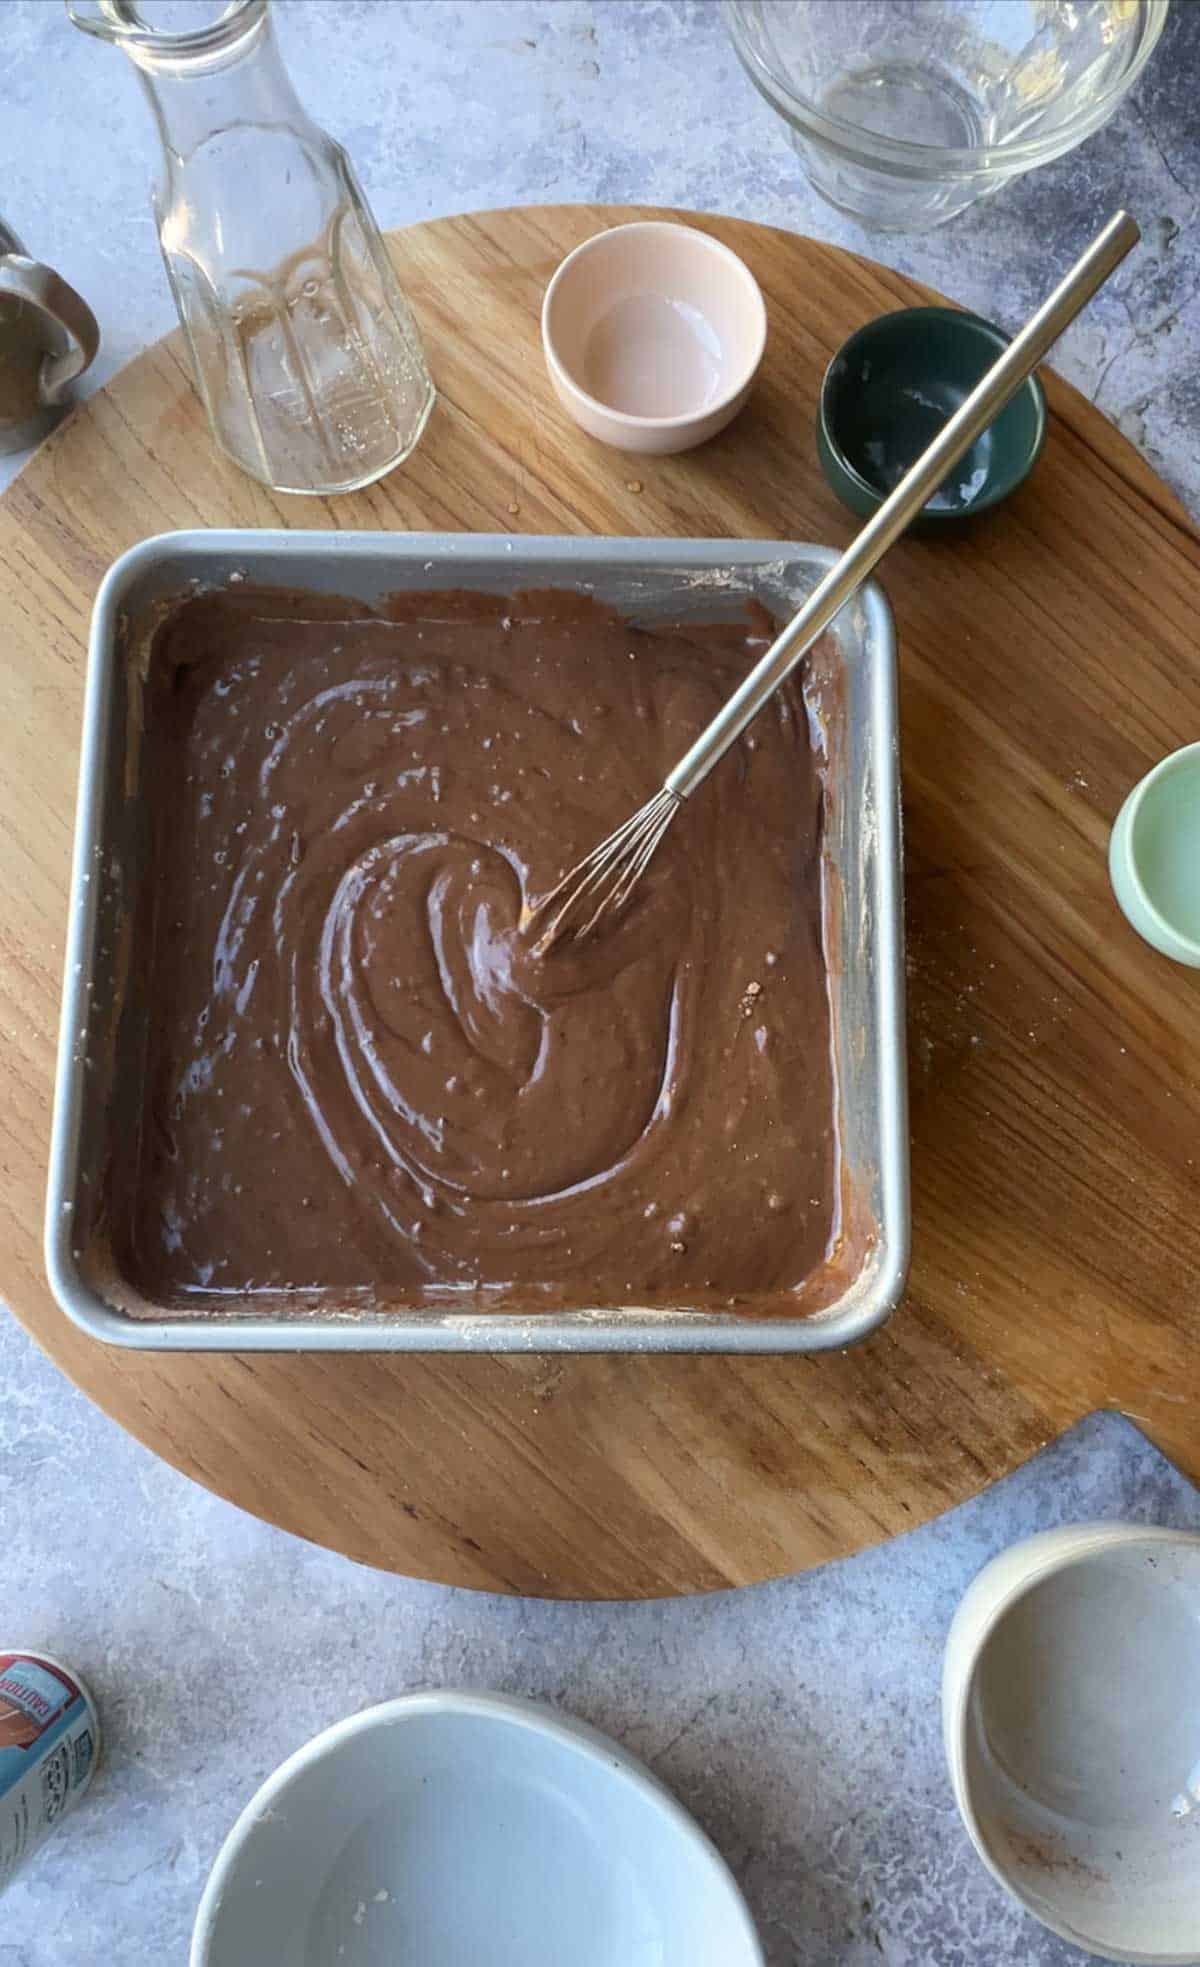 Mixed wet and dry ingredients in a cake pan